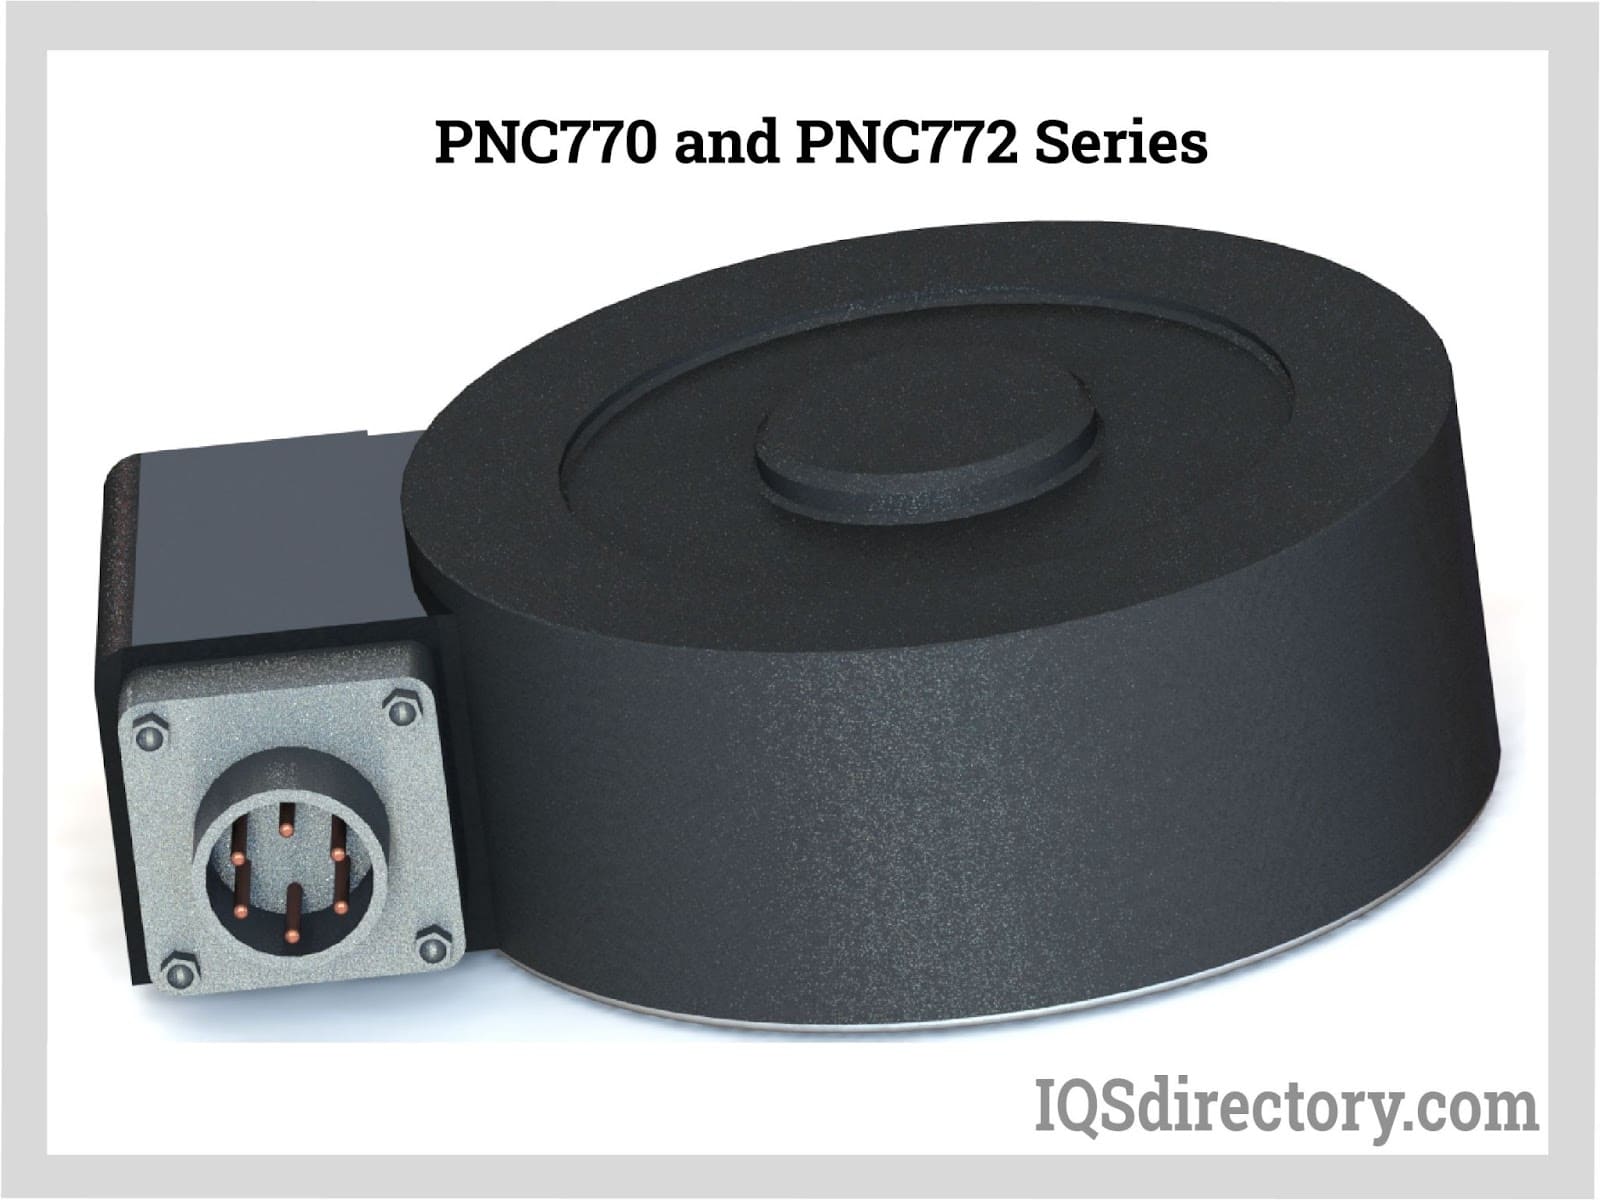 PNC770 and PNC772 Series